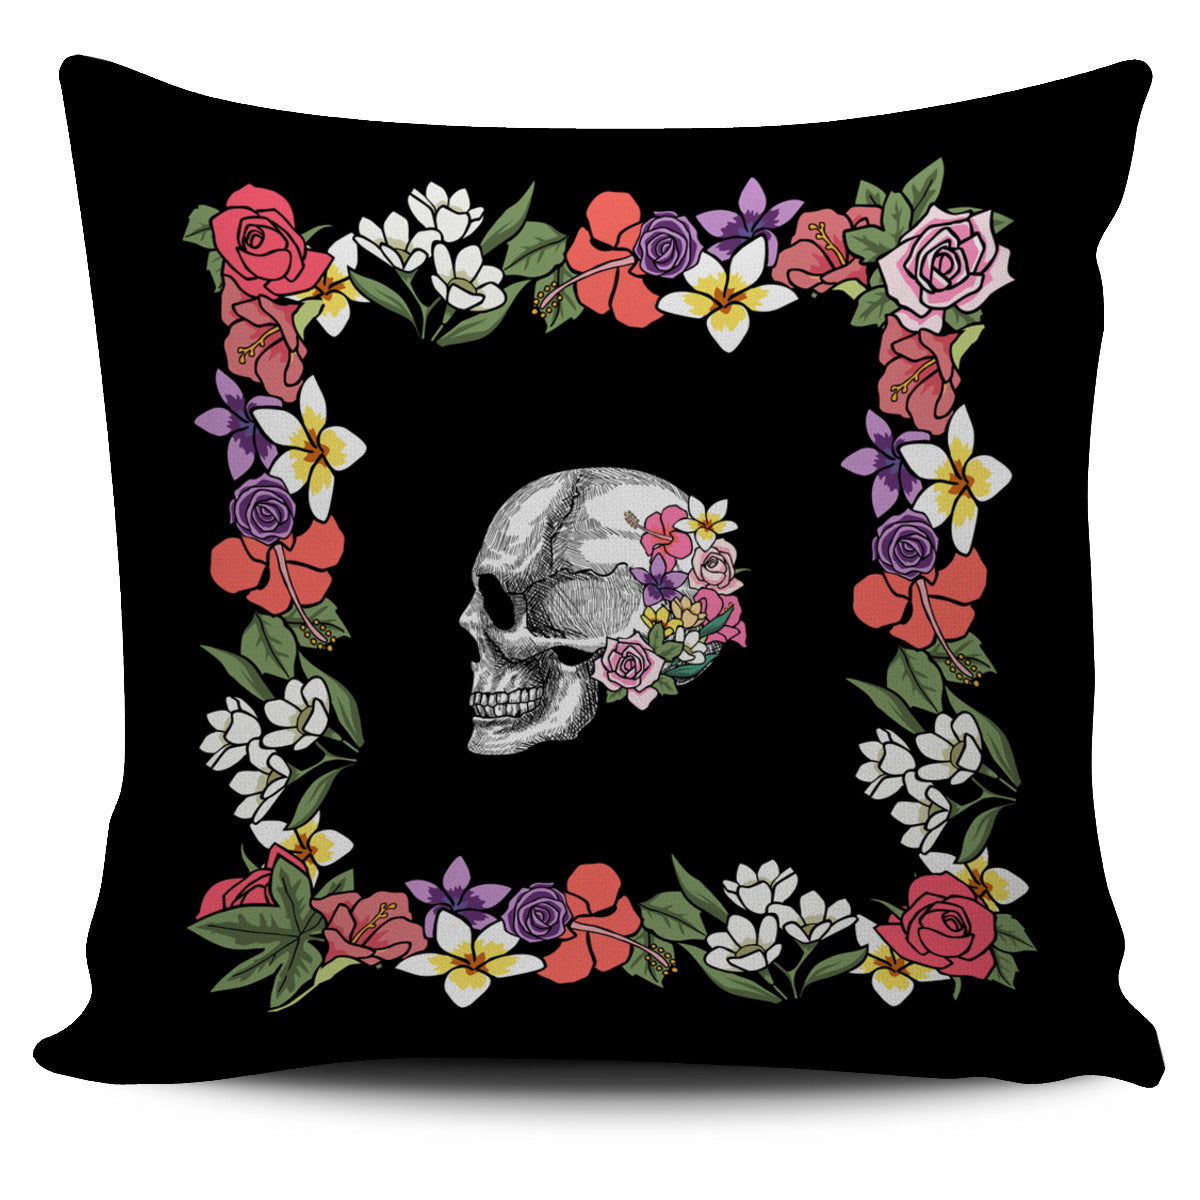 Floral Anatomy Skull Pillow Cover